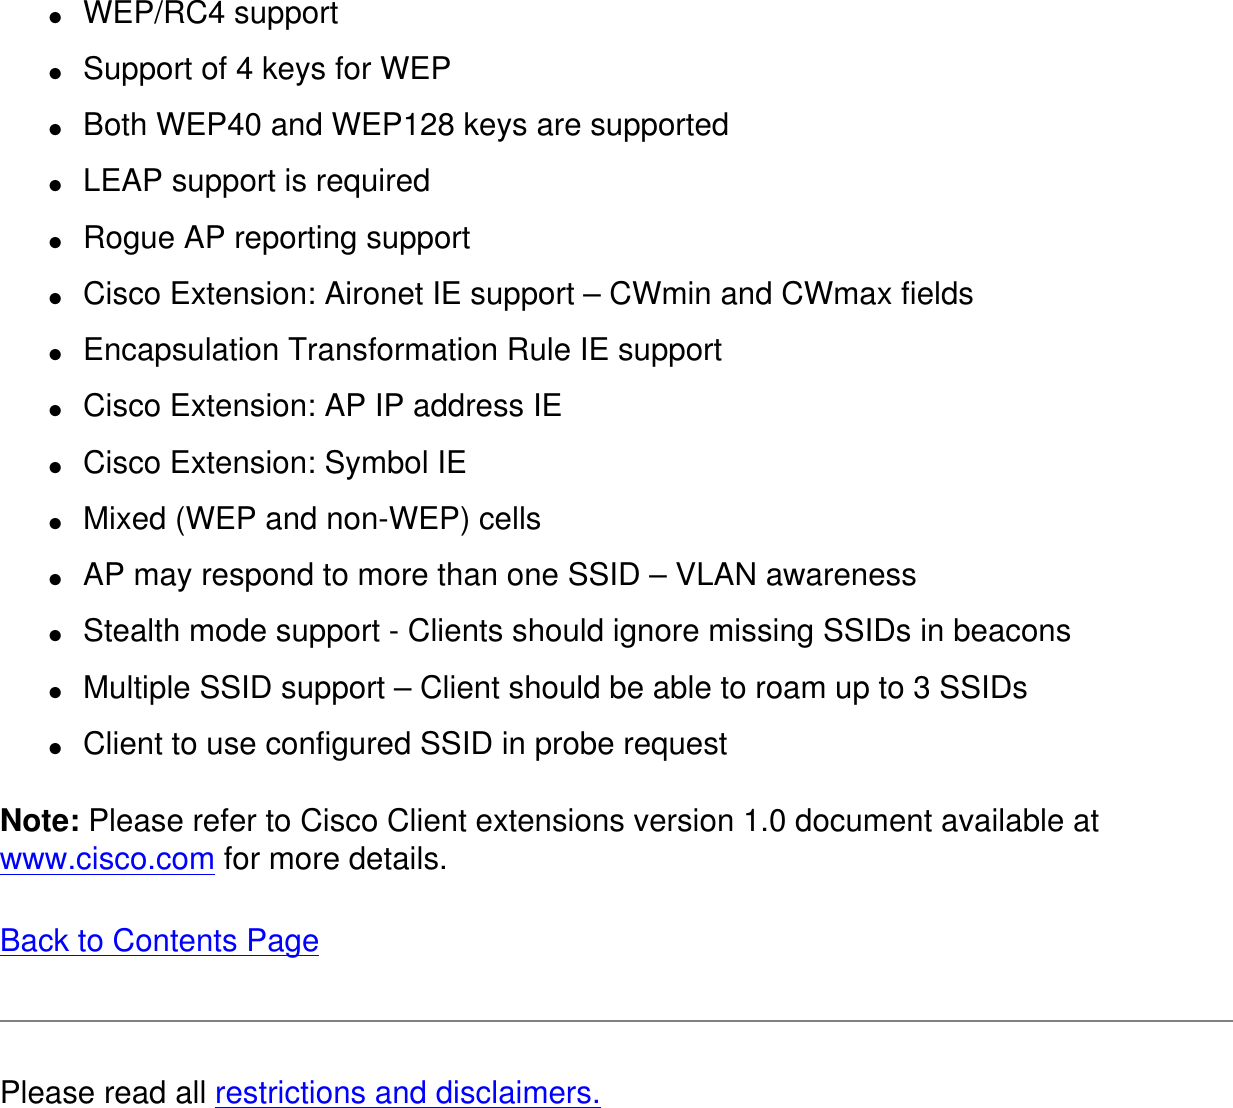 ●     WEP/RC4 support●     Support of 4 keys for WEP●     Both WEP40 and WEP128 keys are supported●     LEAP support is required●     Rogue AP reporting support●     Cisco Extension: Aironet IE support – CWmin and CWmax fields●     Encapsulation Transformation Rule IE support●     Cisco Extension: AP IP address IE●     Cisco Extension: Symbol IE●     Mixed (WEP and non-WEP) cells●     AP may respond to more than one SSID – VLAN awareness●     Stealth mode support - Clients should ignore missing SSIDs in beacons●     Multiple SSID support – Client should be able to roam up to 3 SSIDs●     Client to use configured SSID in probe requestNote: Please refer to Cisco Client extensions version 1.0 document available at www.cisco.com for more details. Back to Contents Page Please read all restrictions and disclaimers.